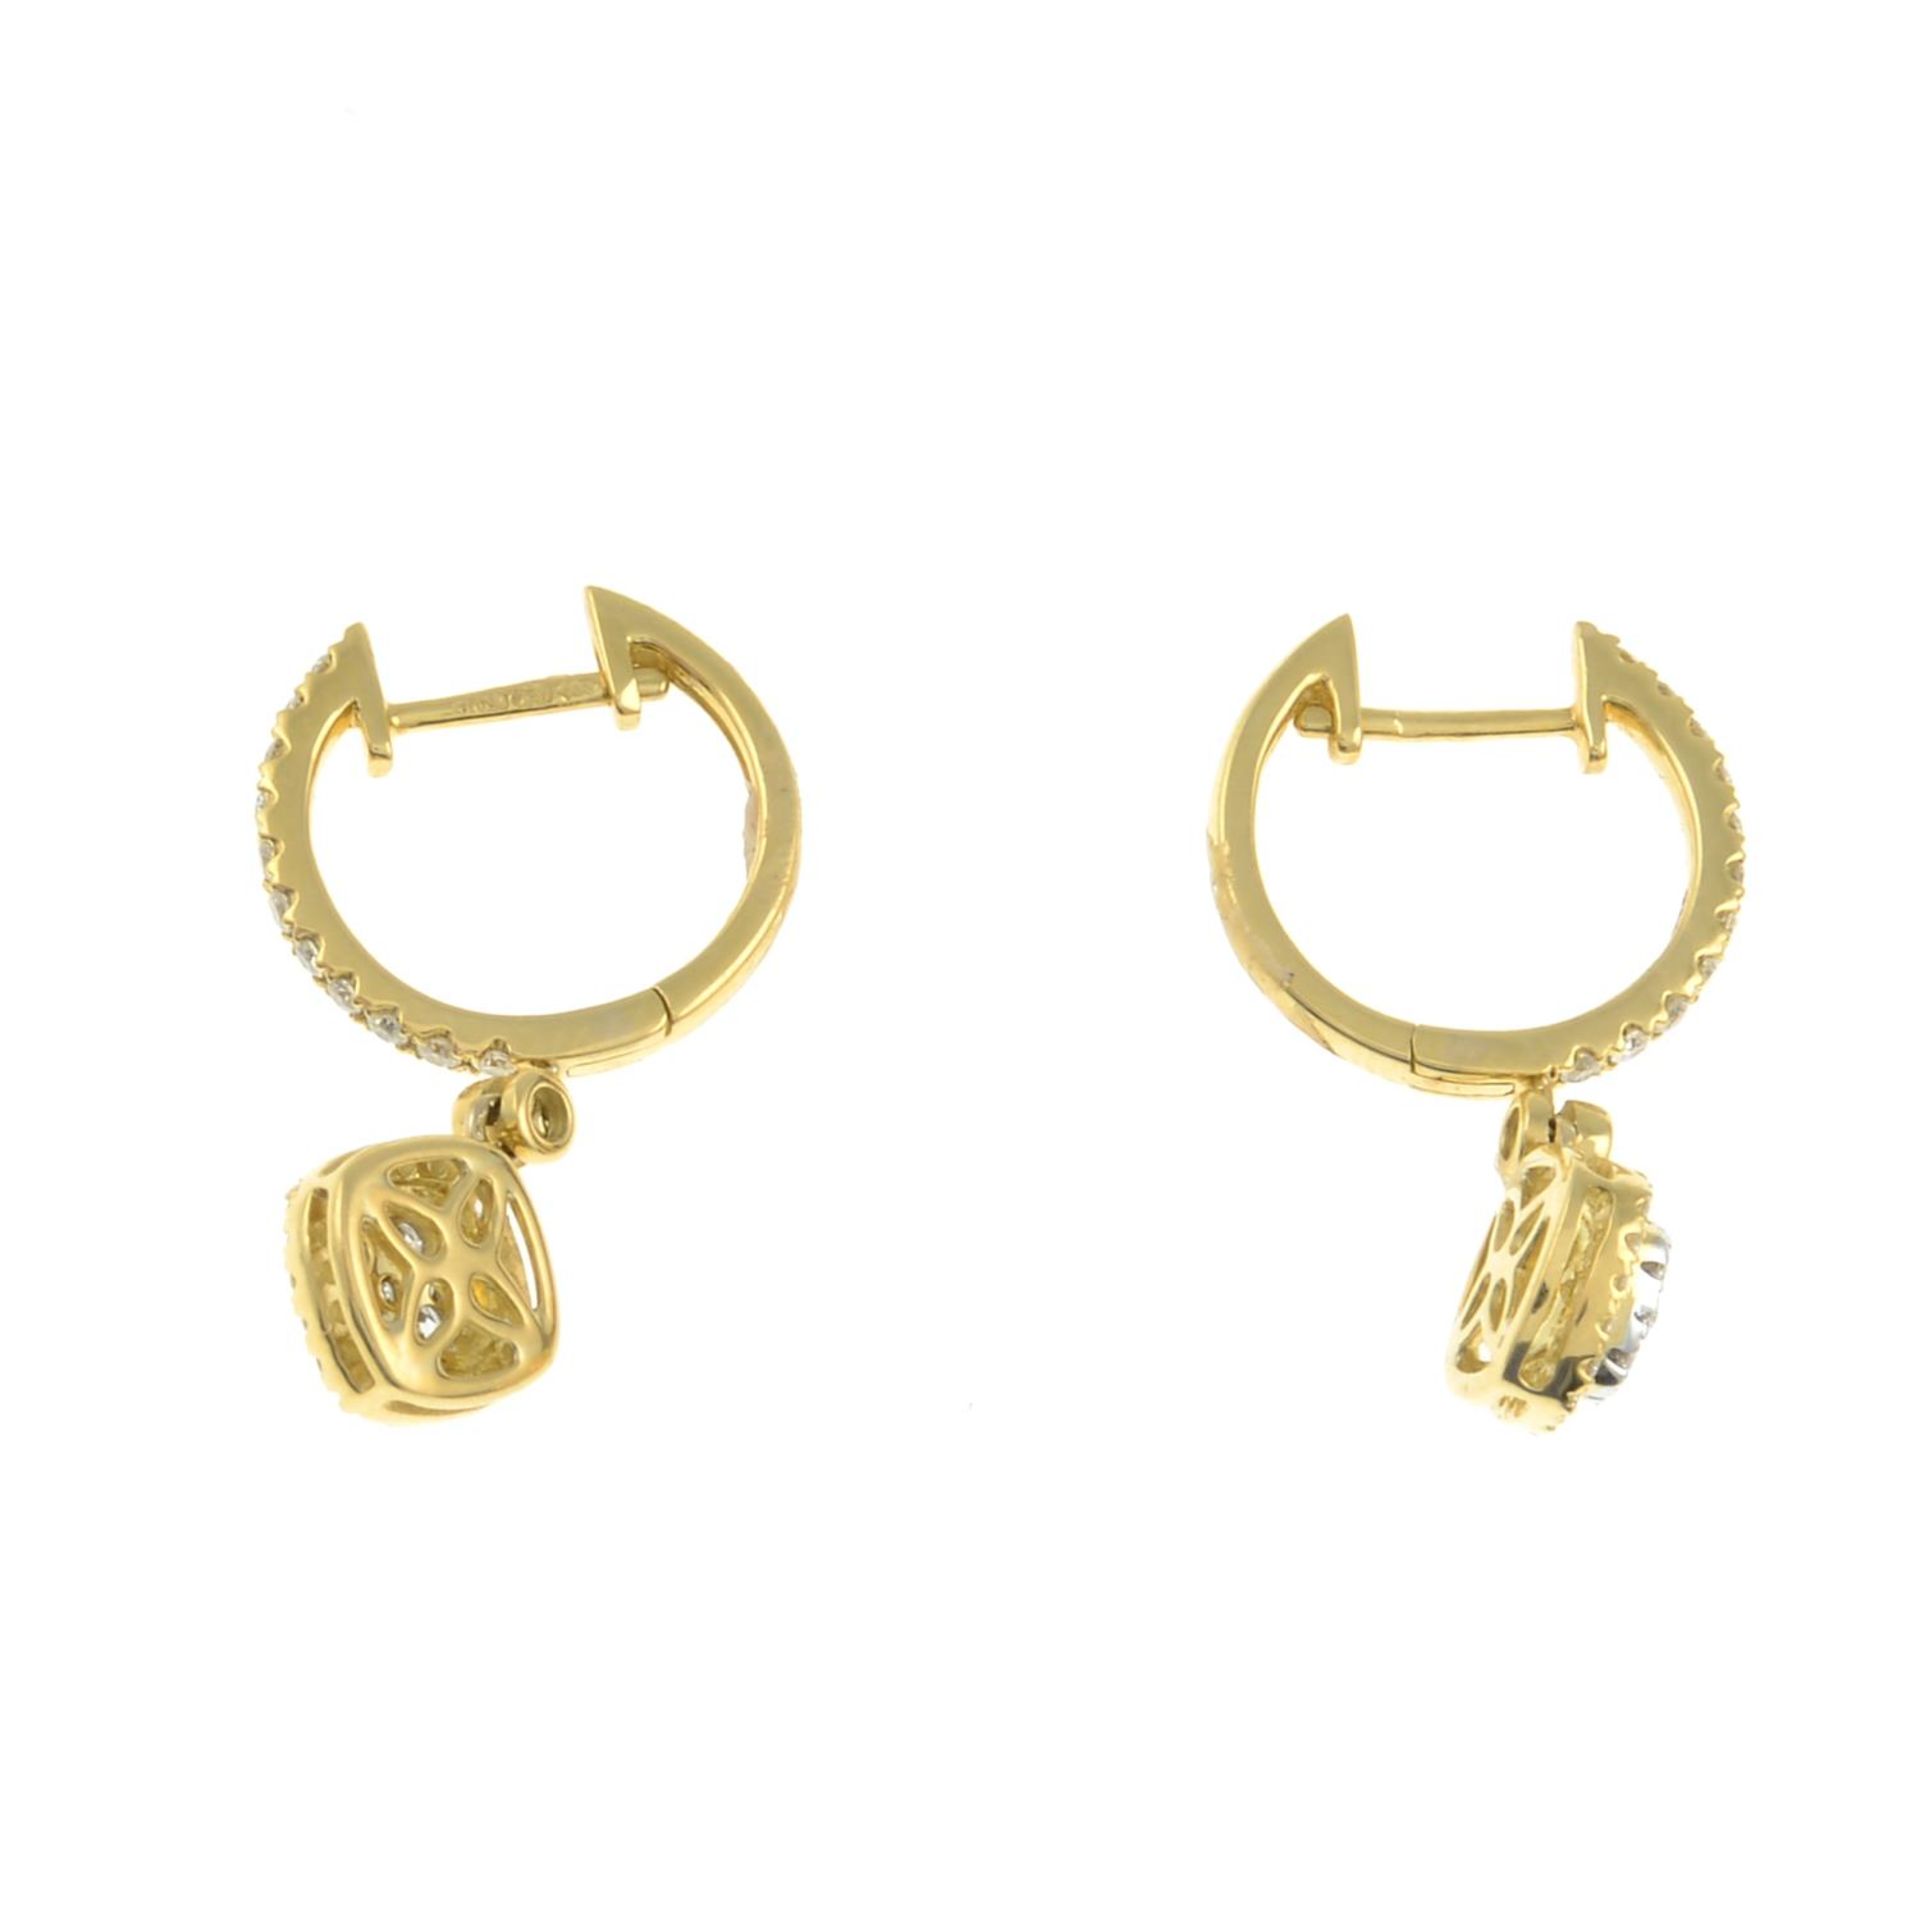 A pair of 18ct gold brilliant-cut diamond earrings.Total diamond weight 0.58ct, - Image 2 of 2